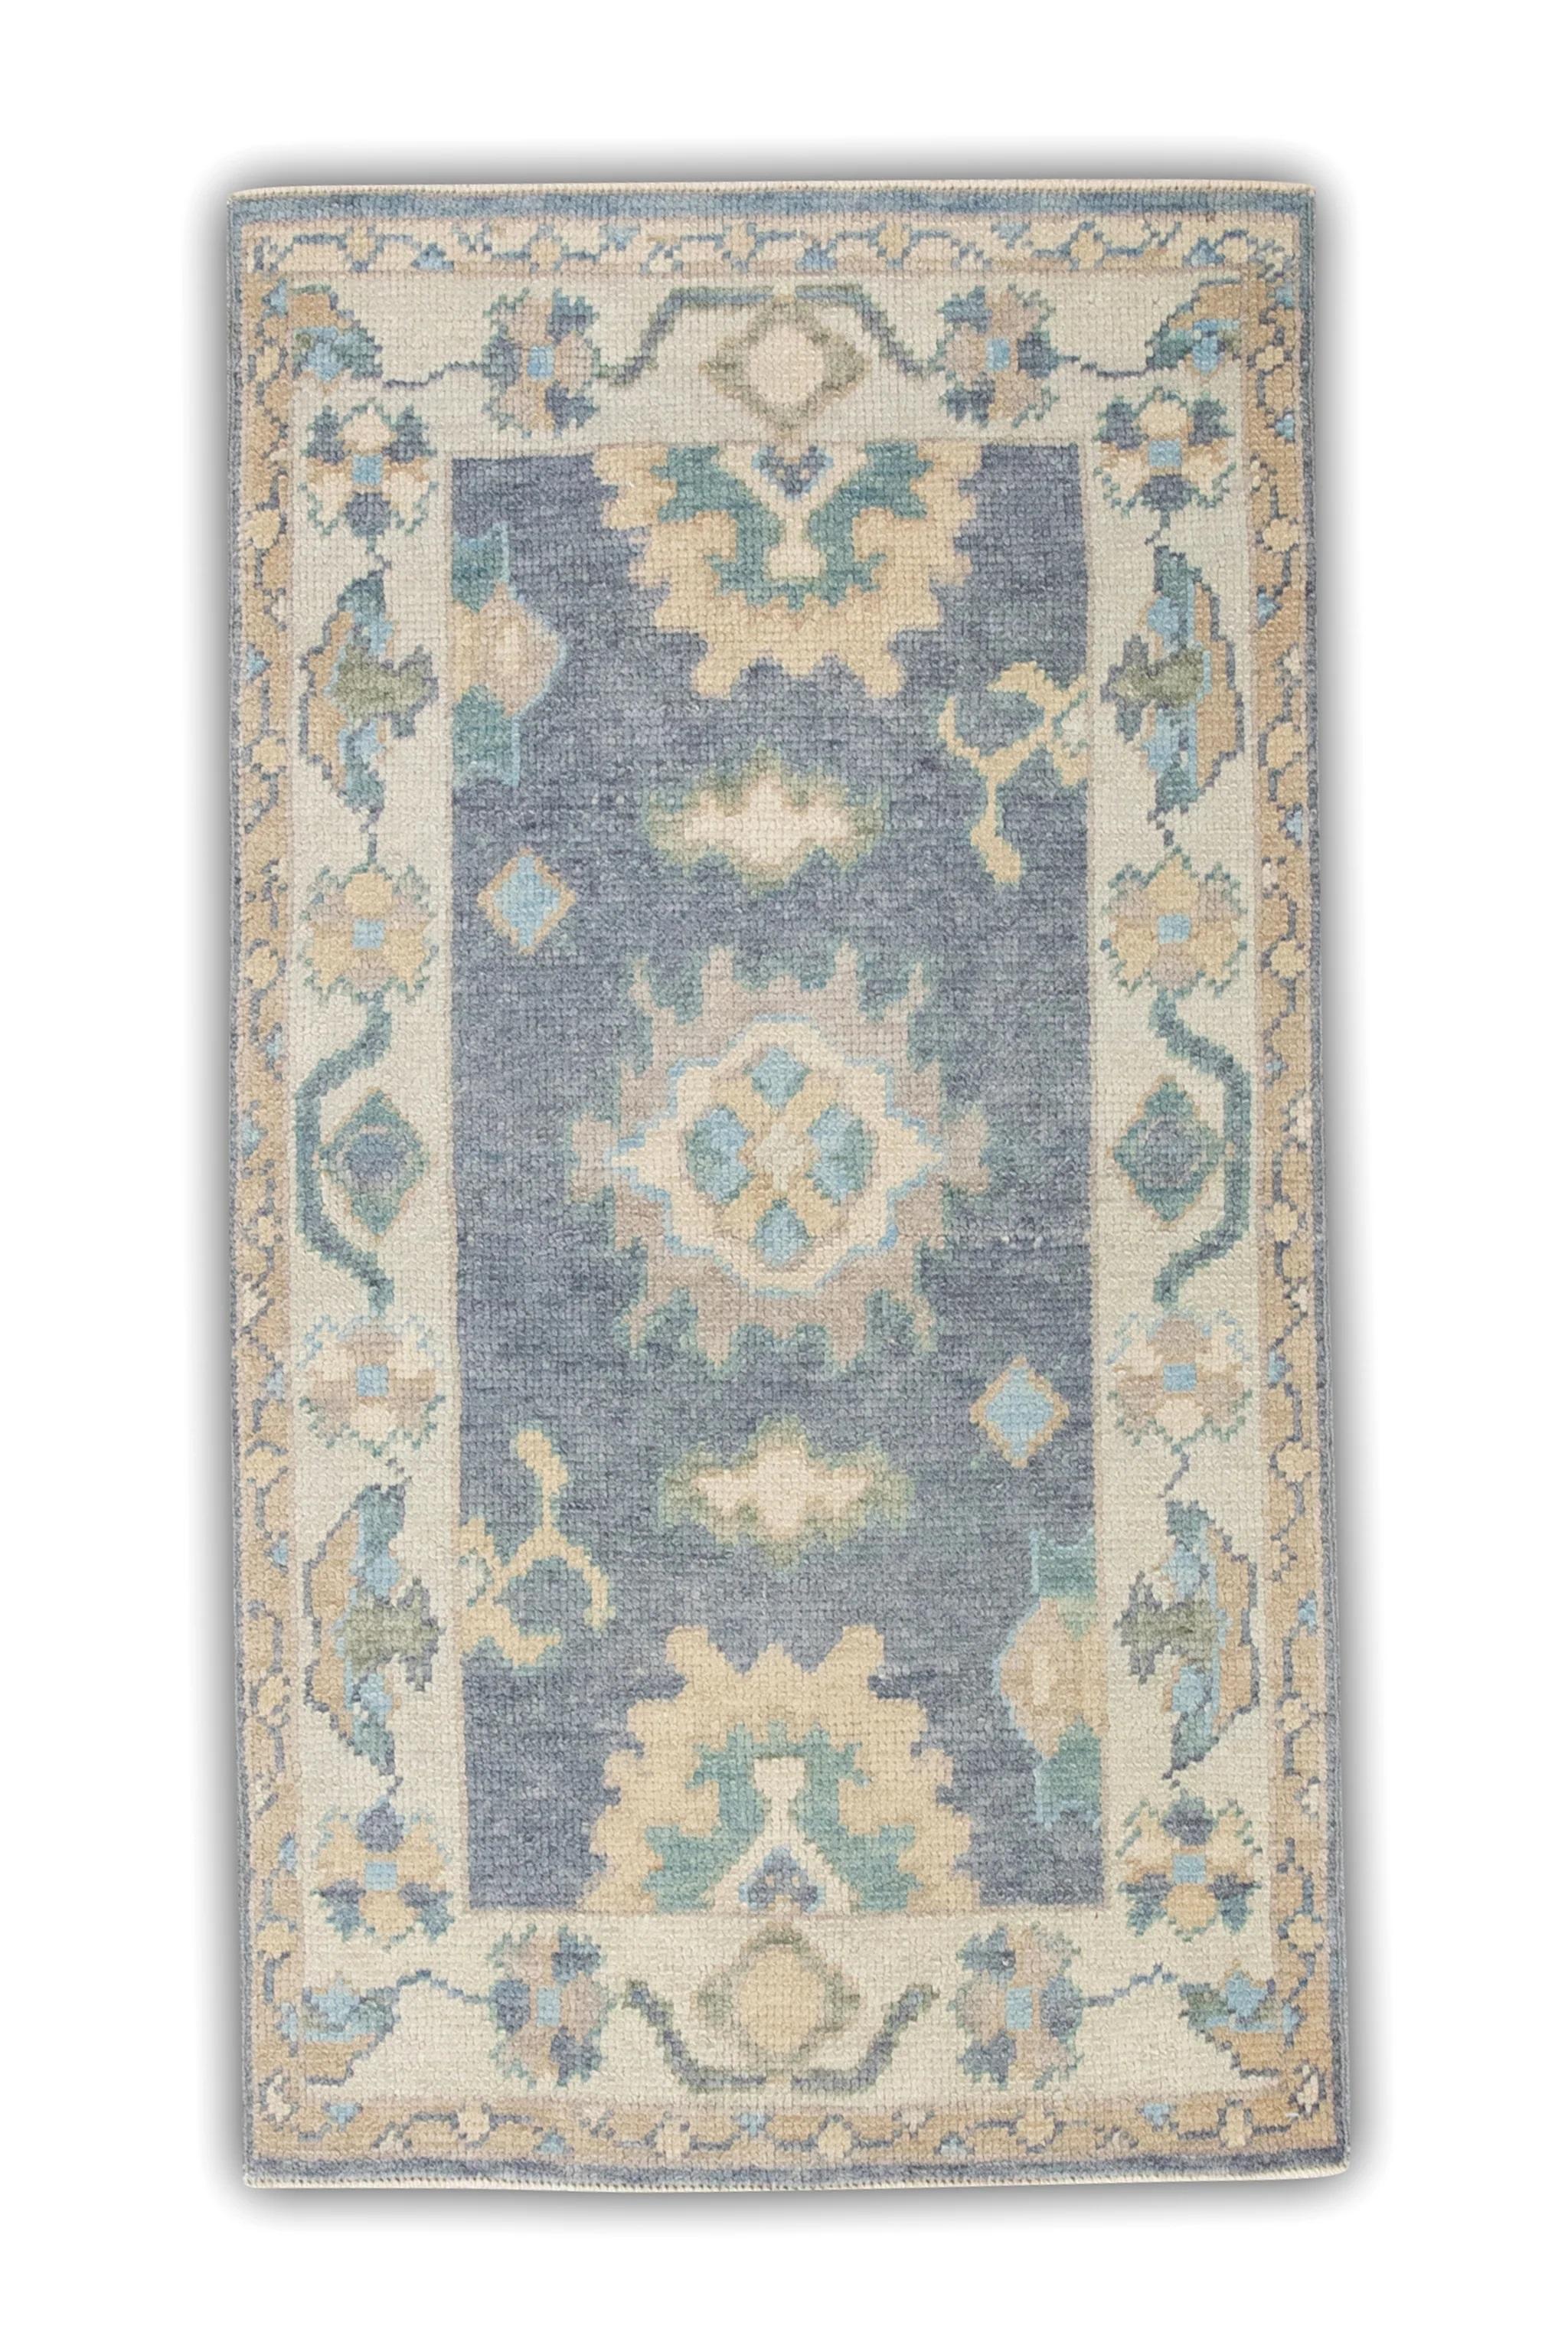 Contemporary Floral Handwoven Wool Turkish Oushak Rug in Gray, Blue, & Orange 2'3